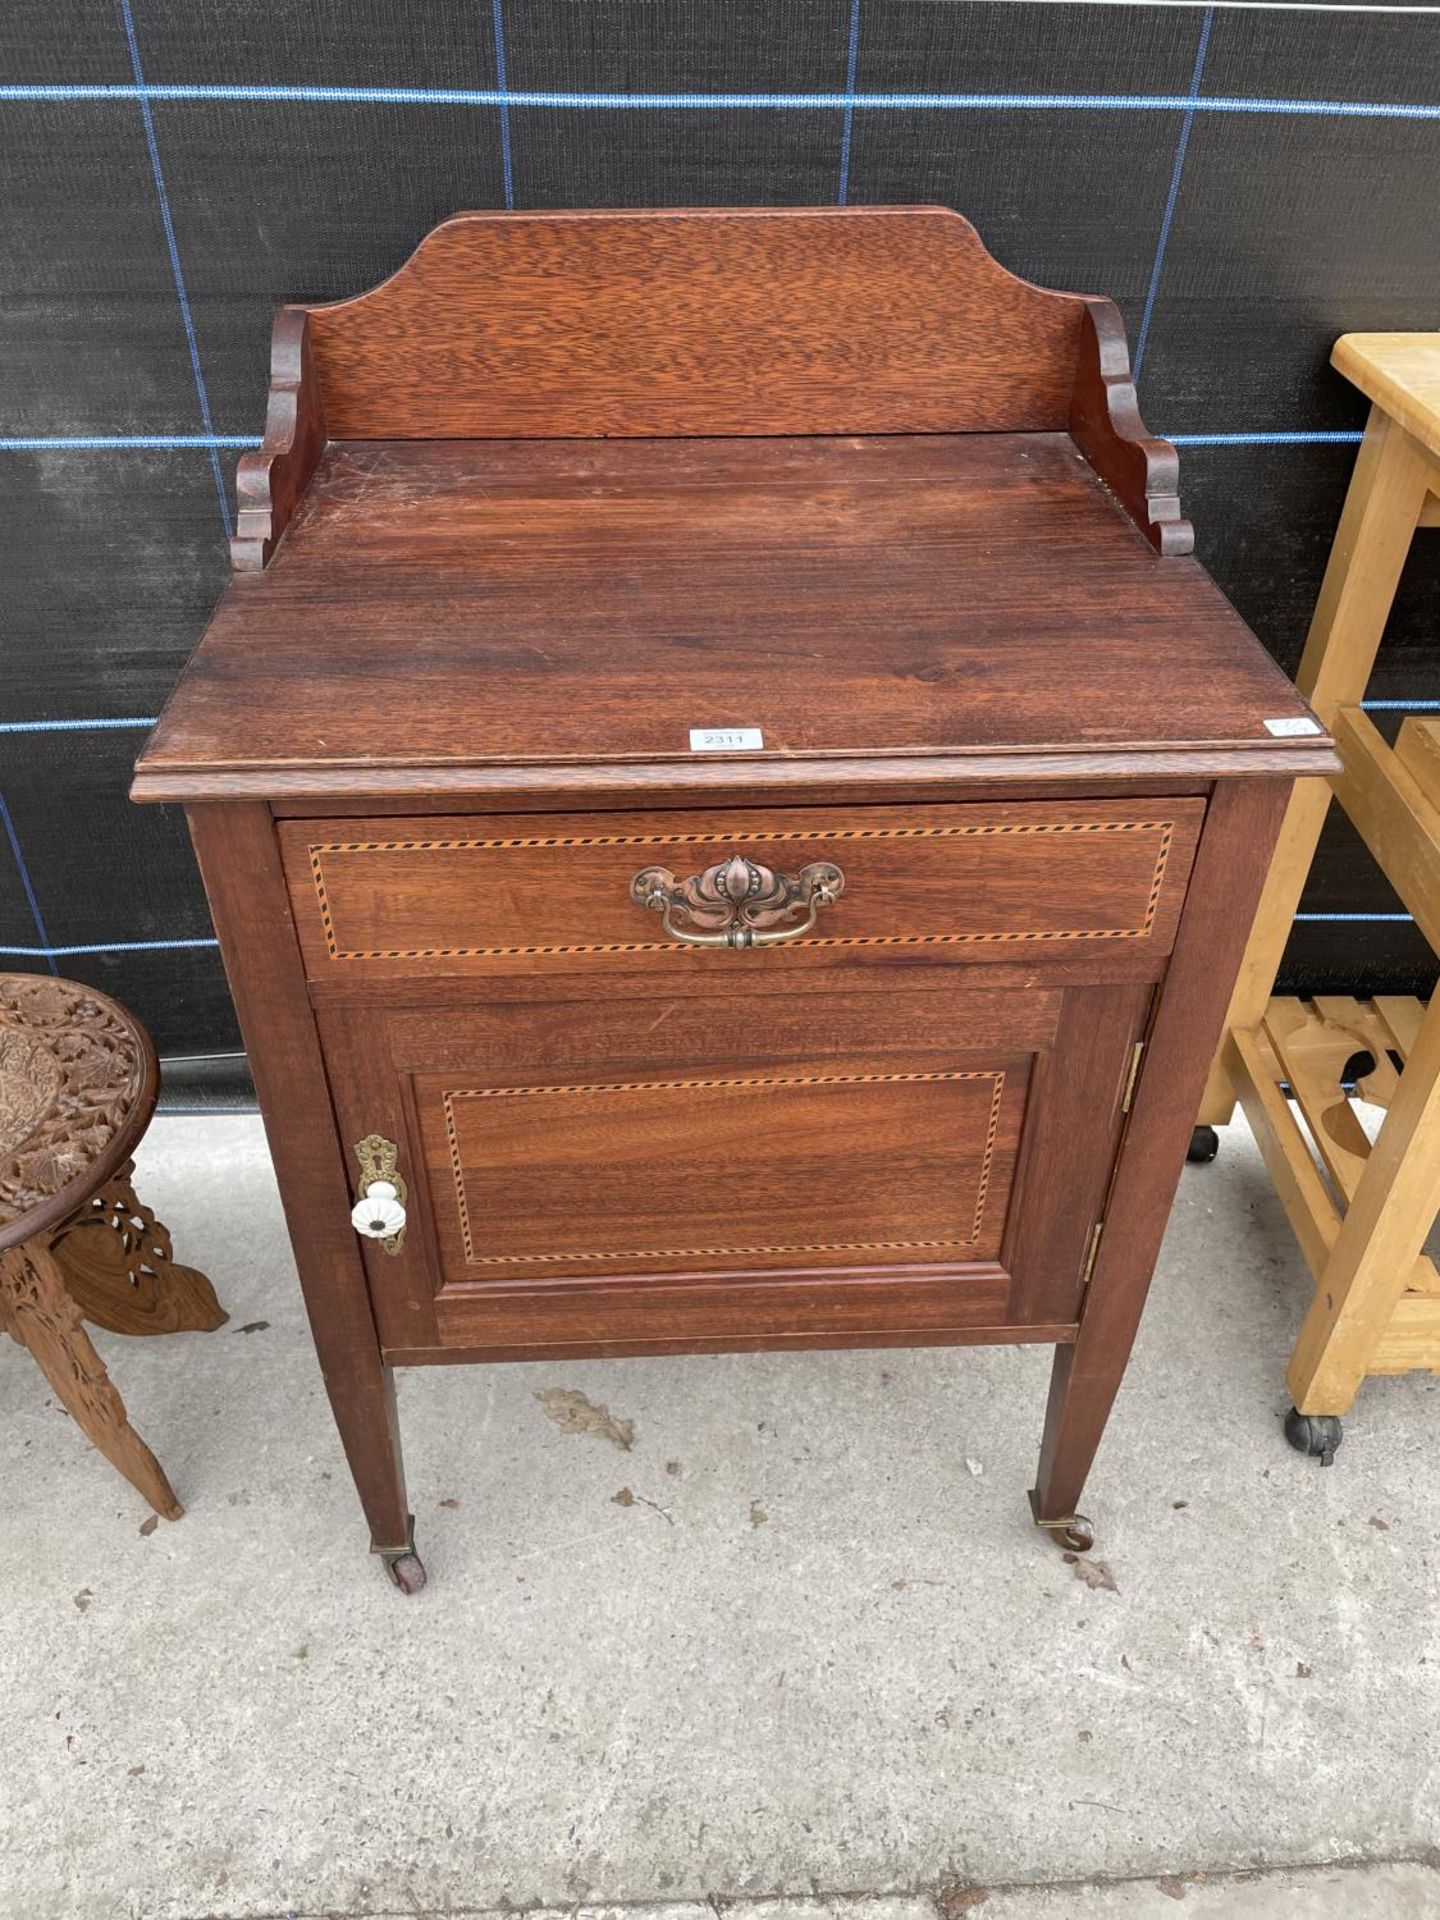 AN EDWARDIAN MAHOGANY AND INLAID WASHSTAND WITH GALLERY BACK, 25" WIDE